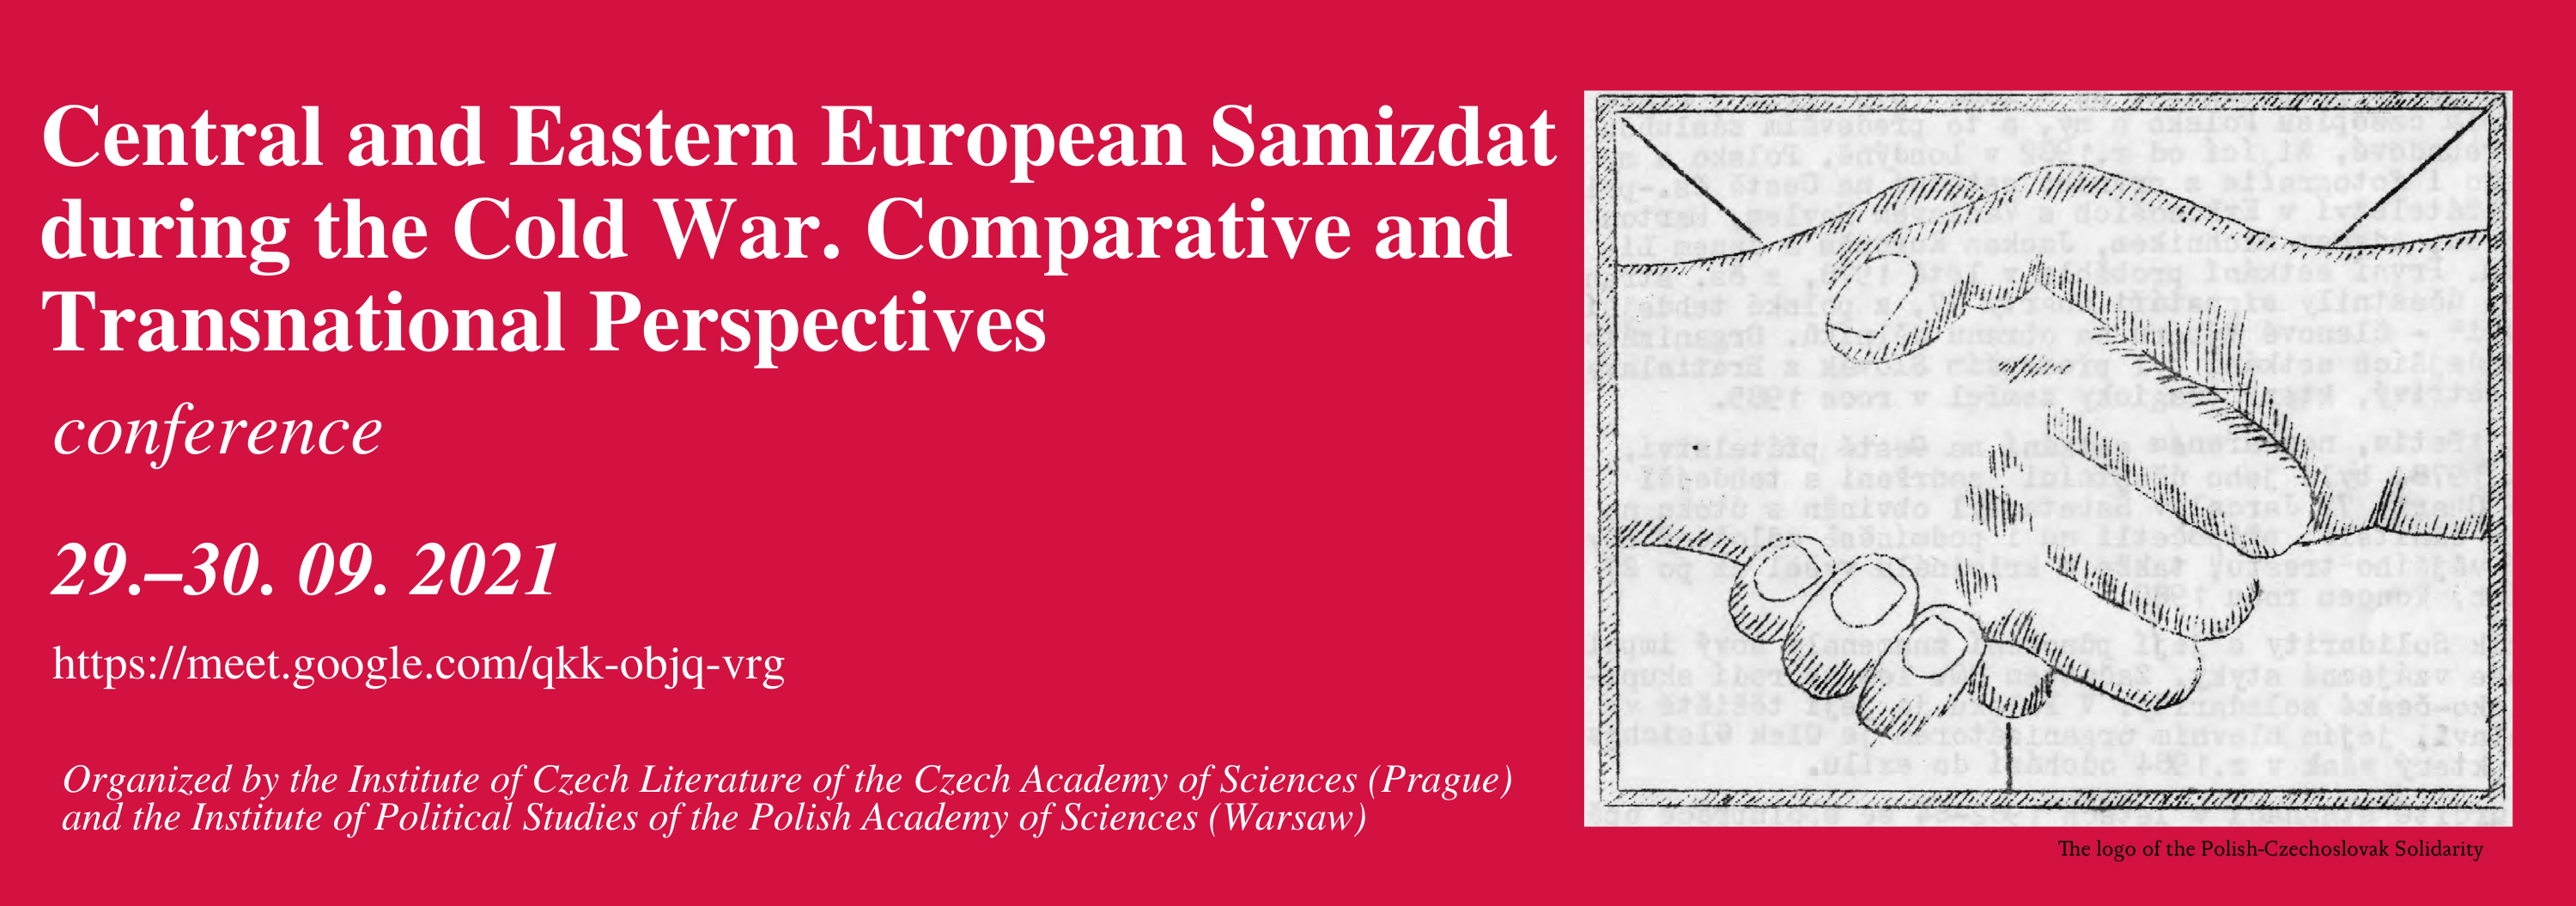 Recording of the conference “Central and Eastern European Samizdat during the Cold War. Comparative and Transnational Perspectives”